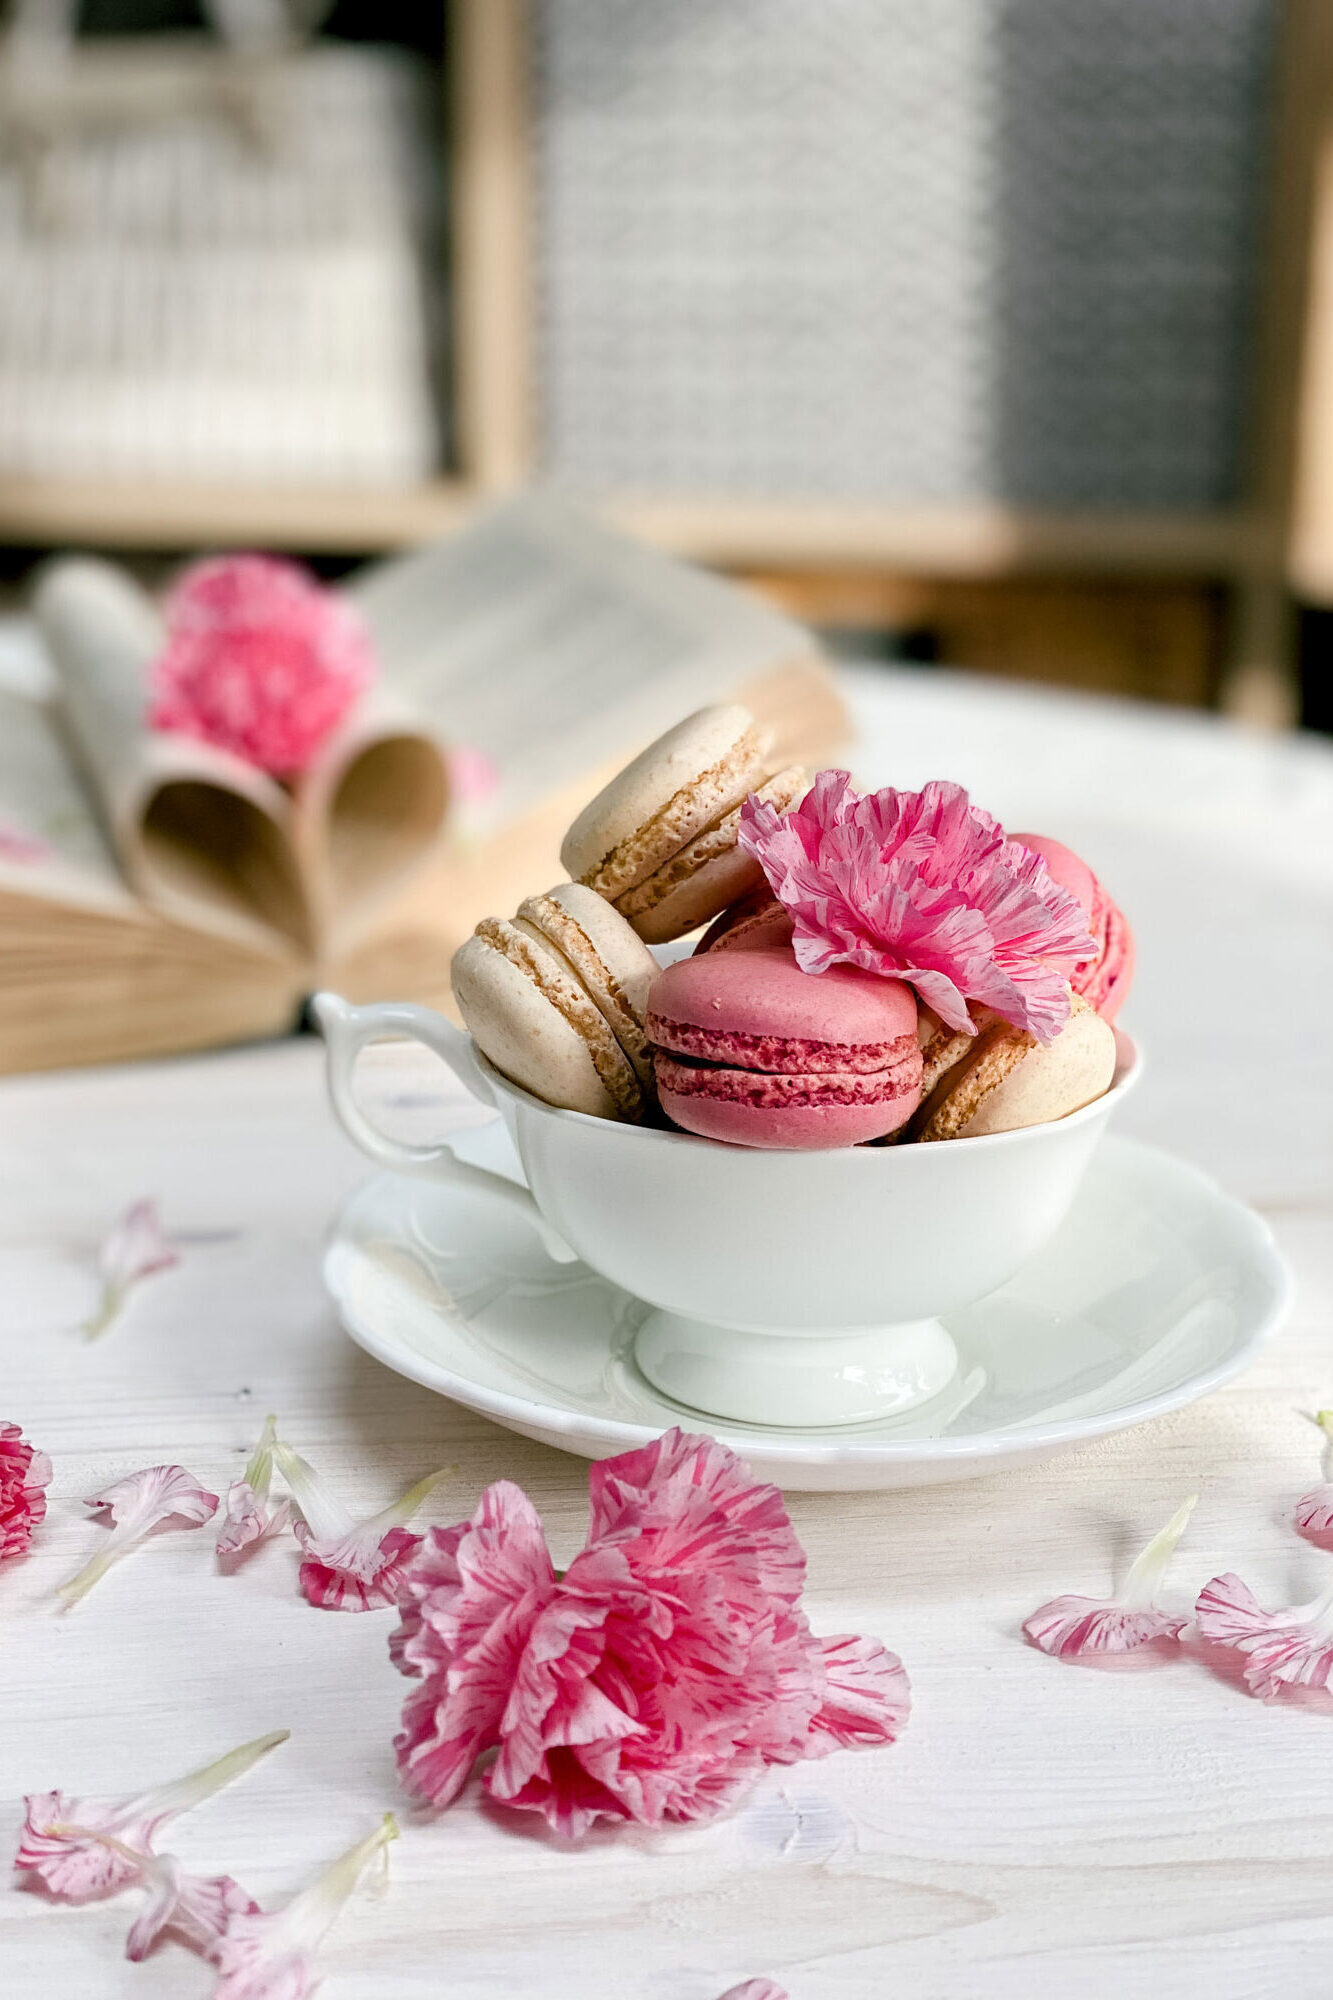 A professional food photography ecommerce product photo of a porcelain cup filled with macaroons in light, airy and romantic design